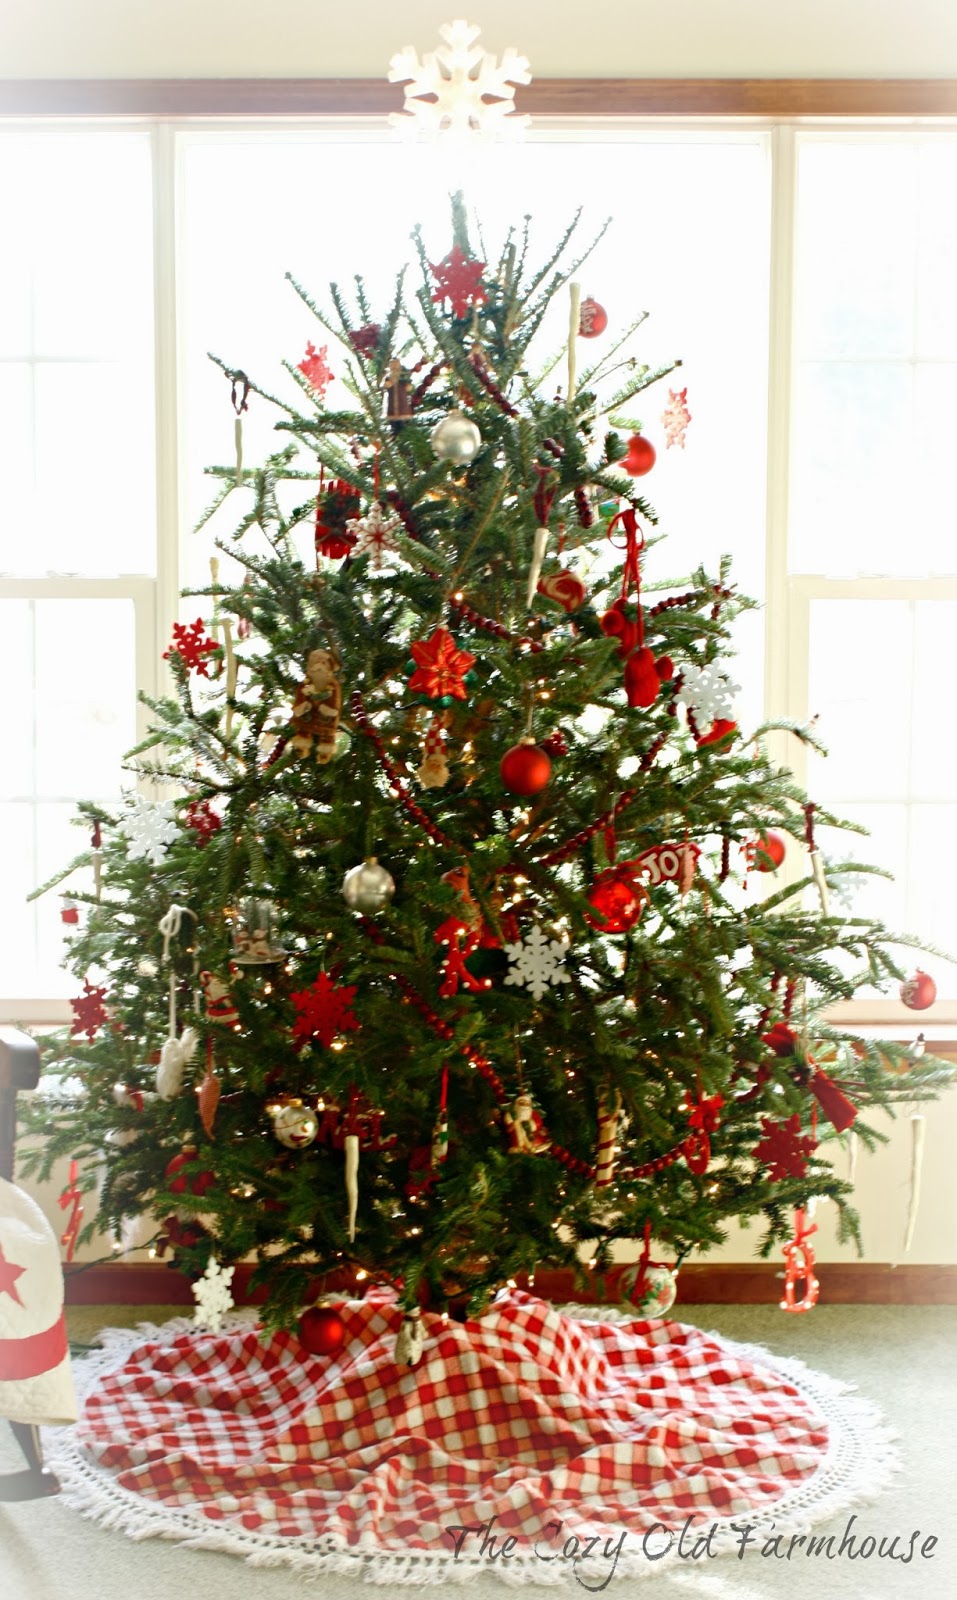 The Cozy Old "Farmhouse": Red and White Nordic Christmas Tree